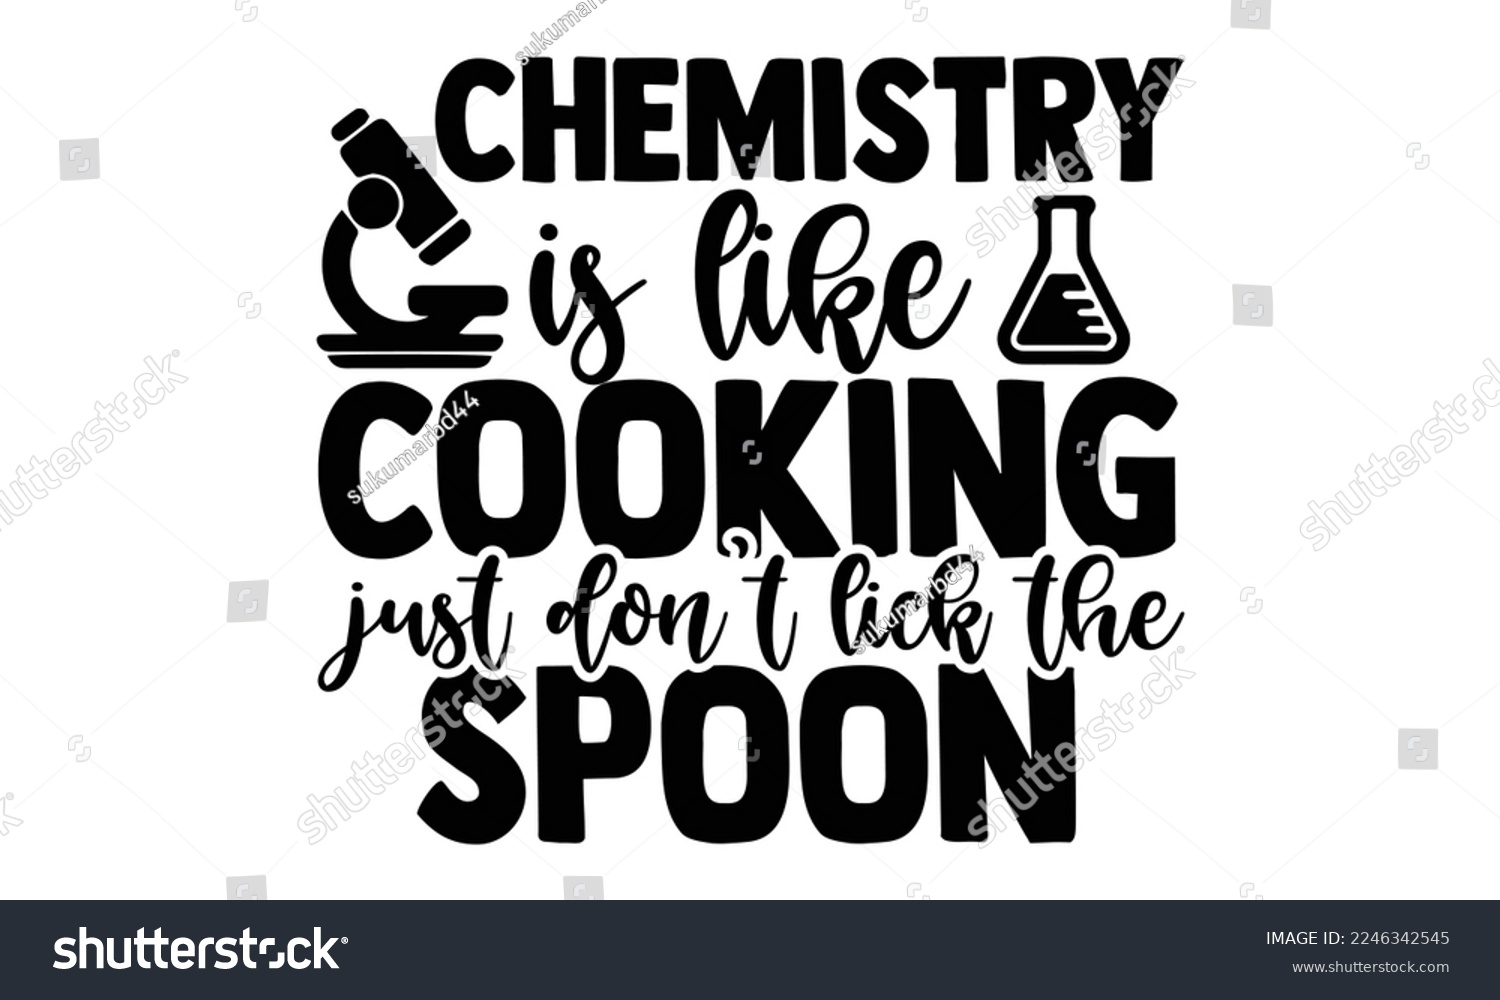 SVG of Chemistry Is Like Cooking Just Don’t Lick The Spoon - Scientist t shirt design, Hand drawn lettering phrase isolated on white background, Calligraphy quotes design, SVG Files for Cutting, bag, cups, c svg